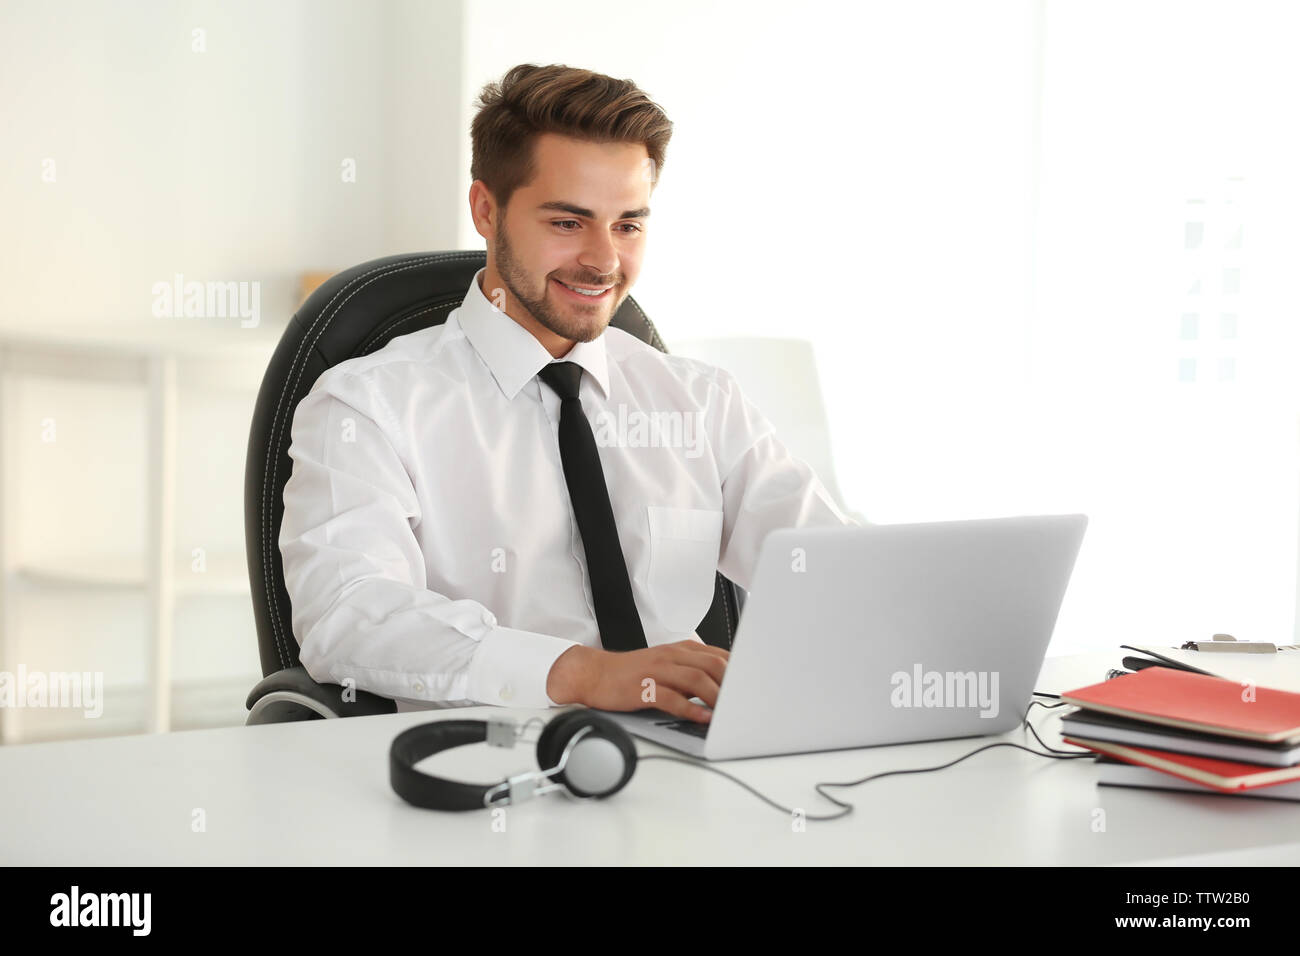 Handsome young man working on laptop in office Stock Photo